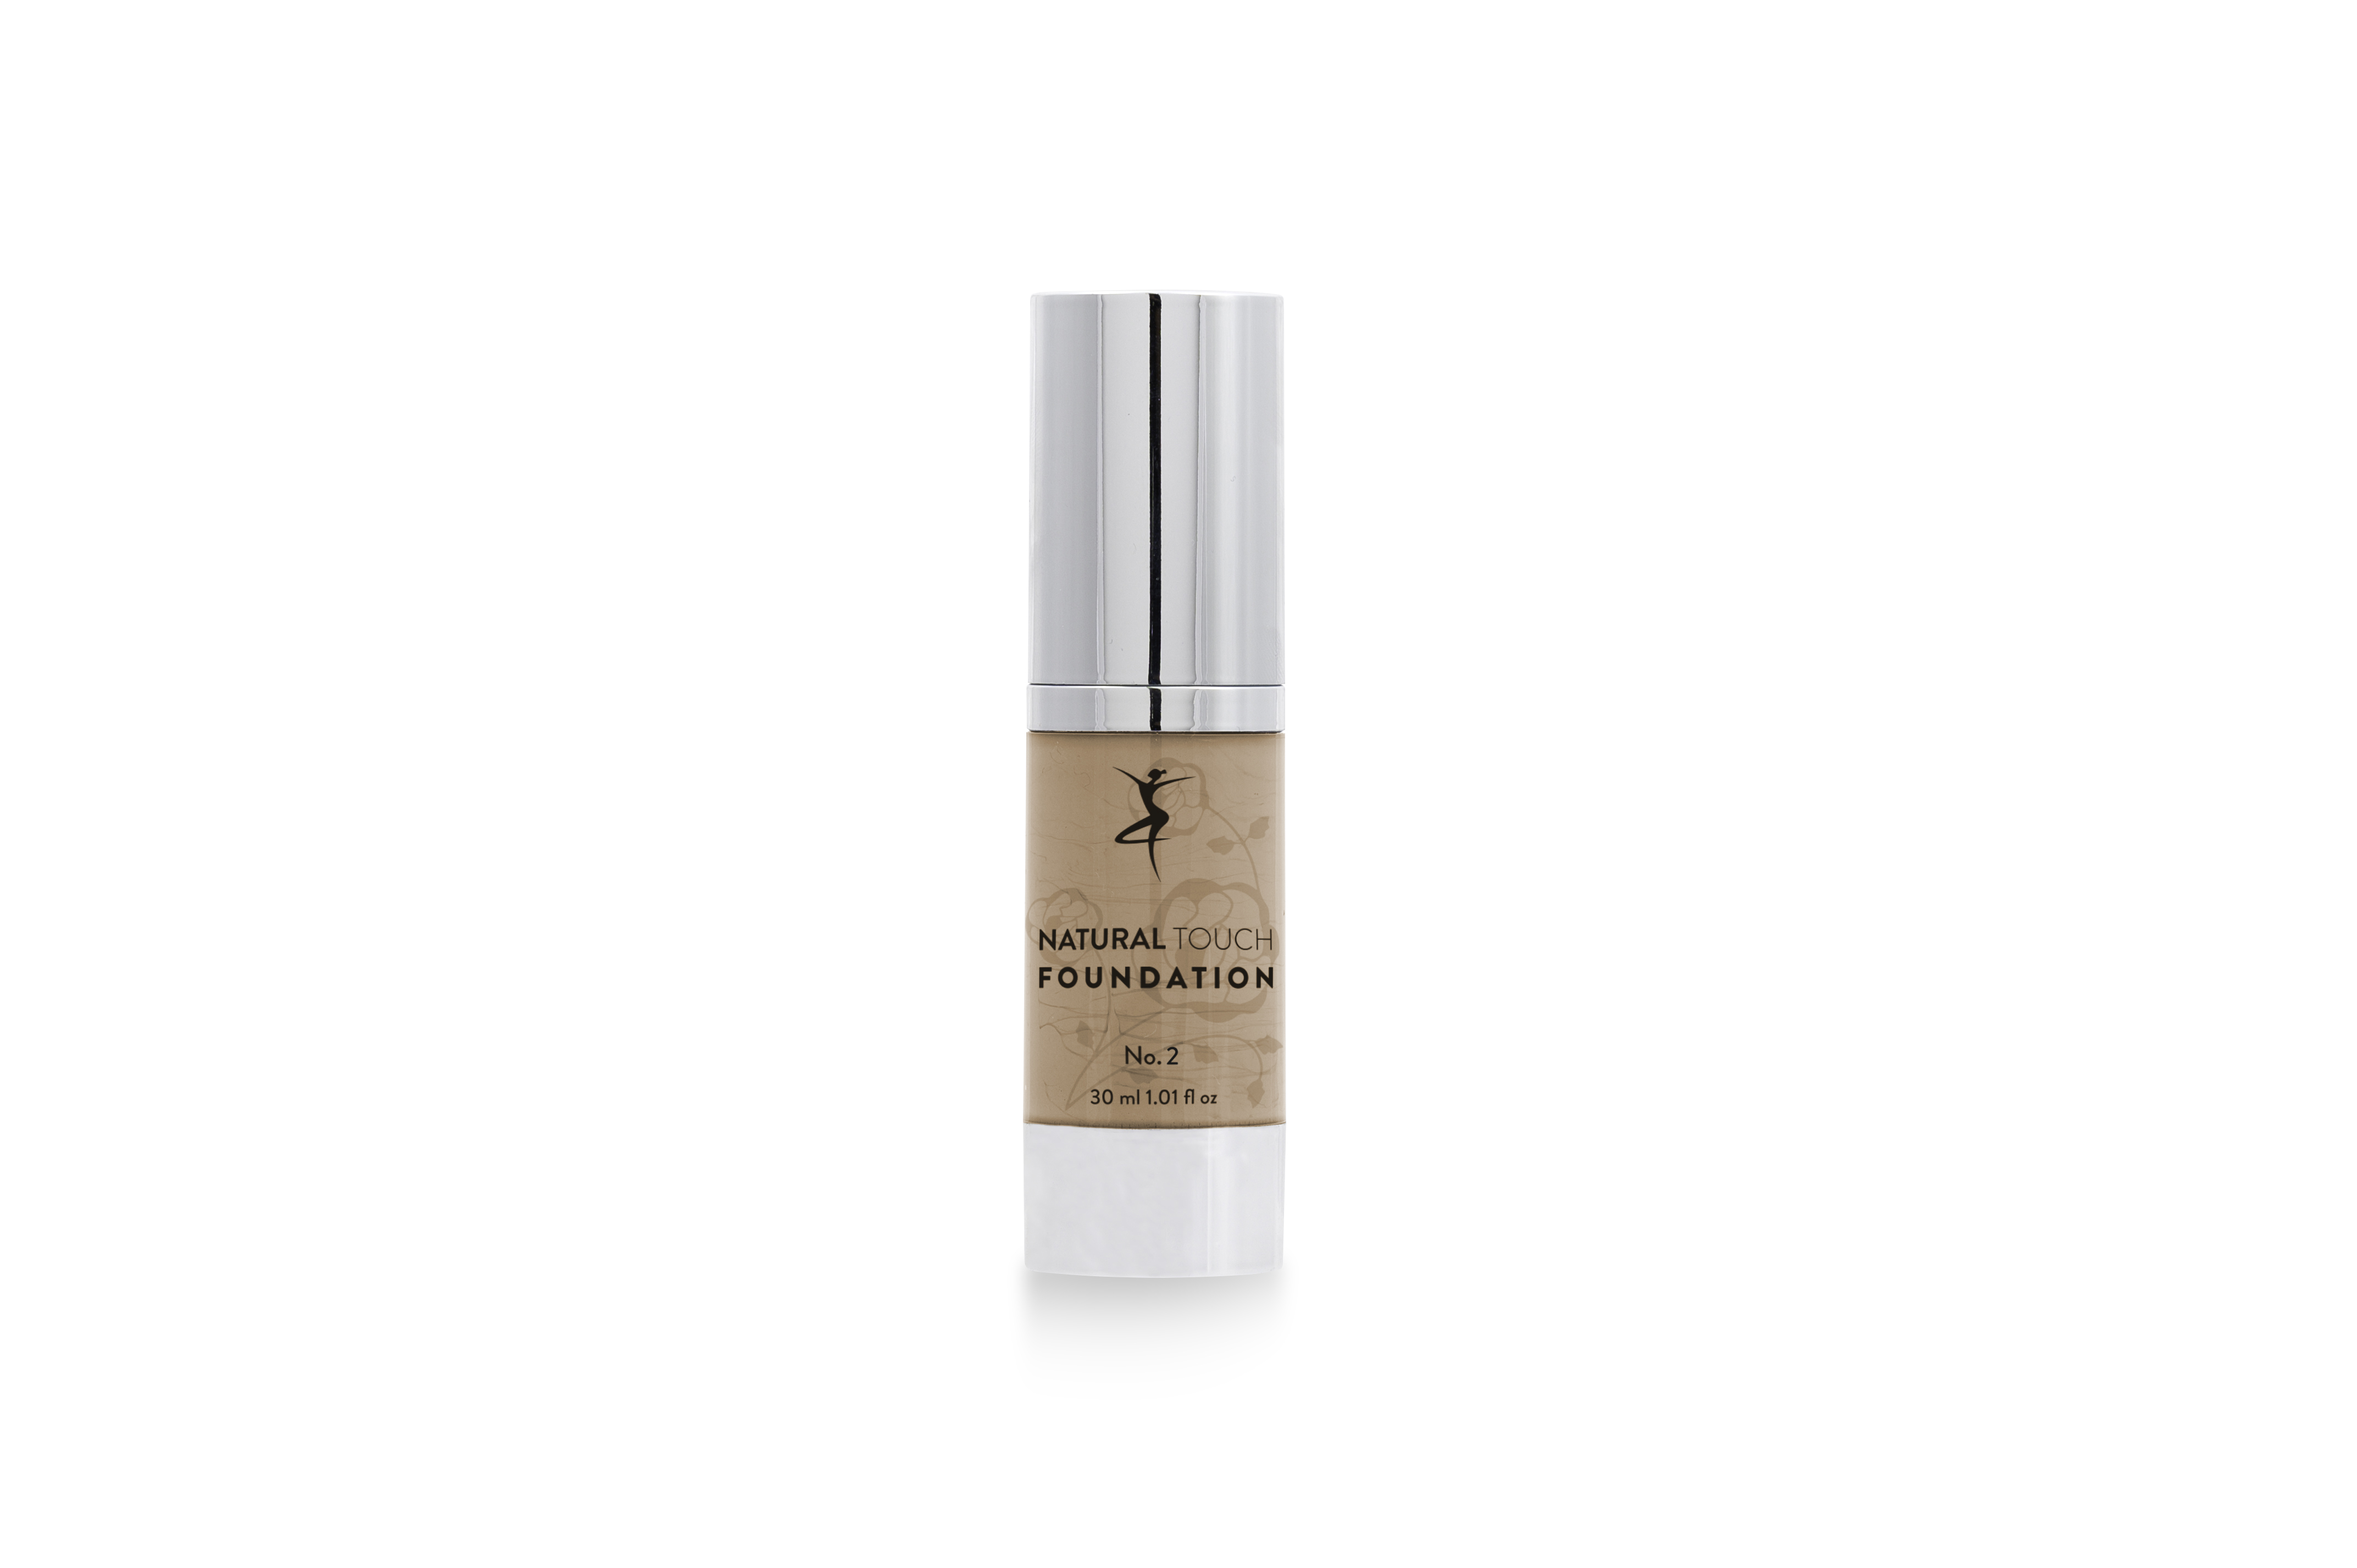 Natural Touch Foundation No. 2 Nertis